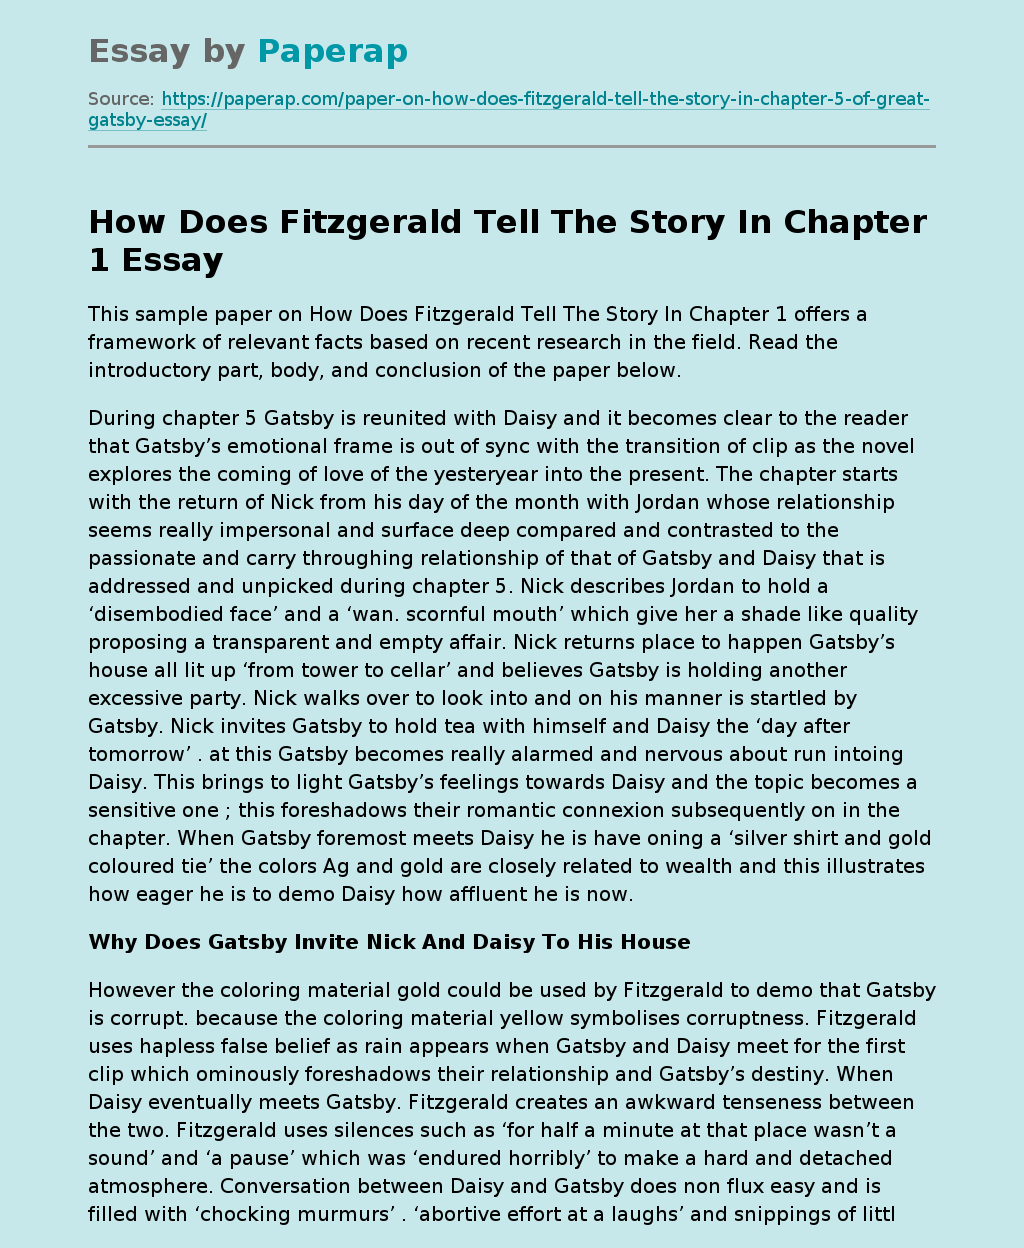 How Does Fitzgerald Tell The Story In Chapter 1